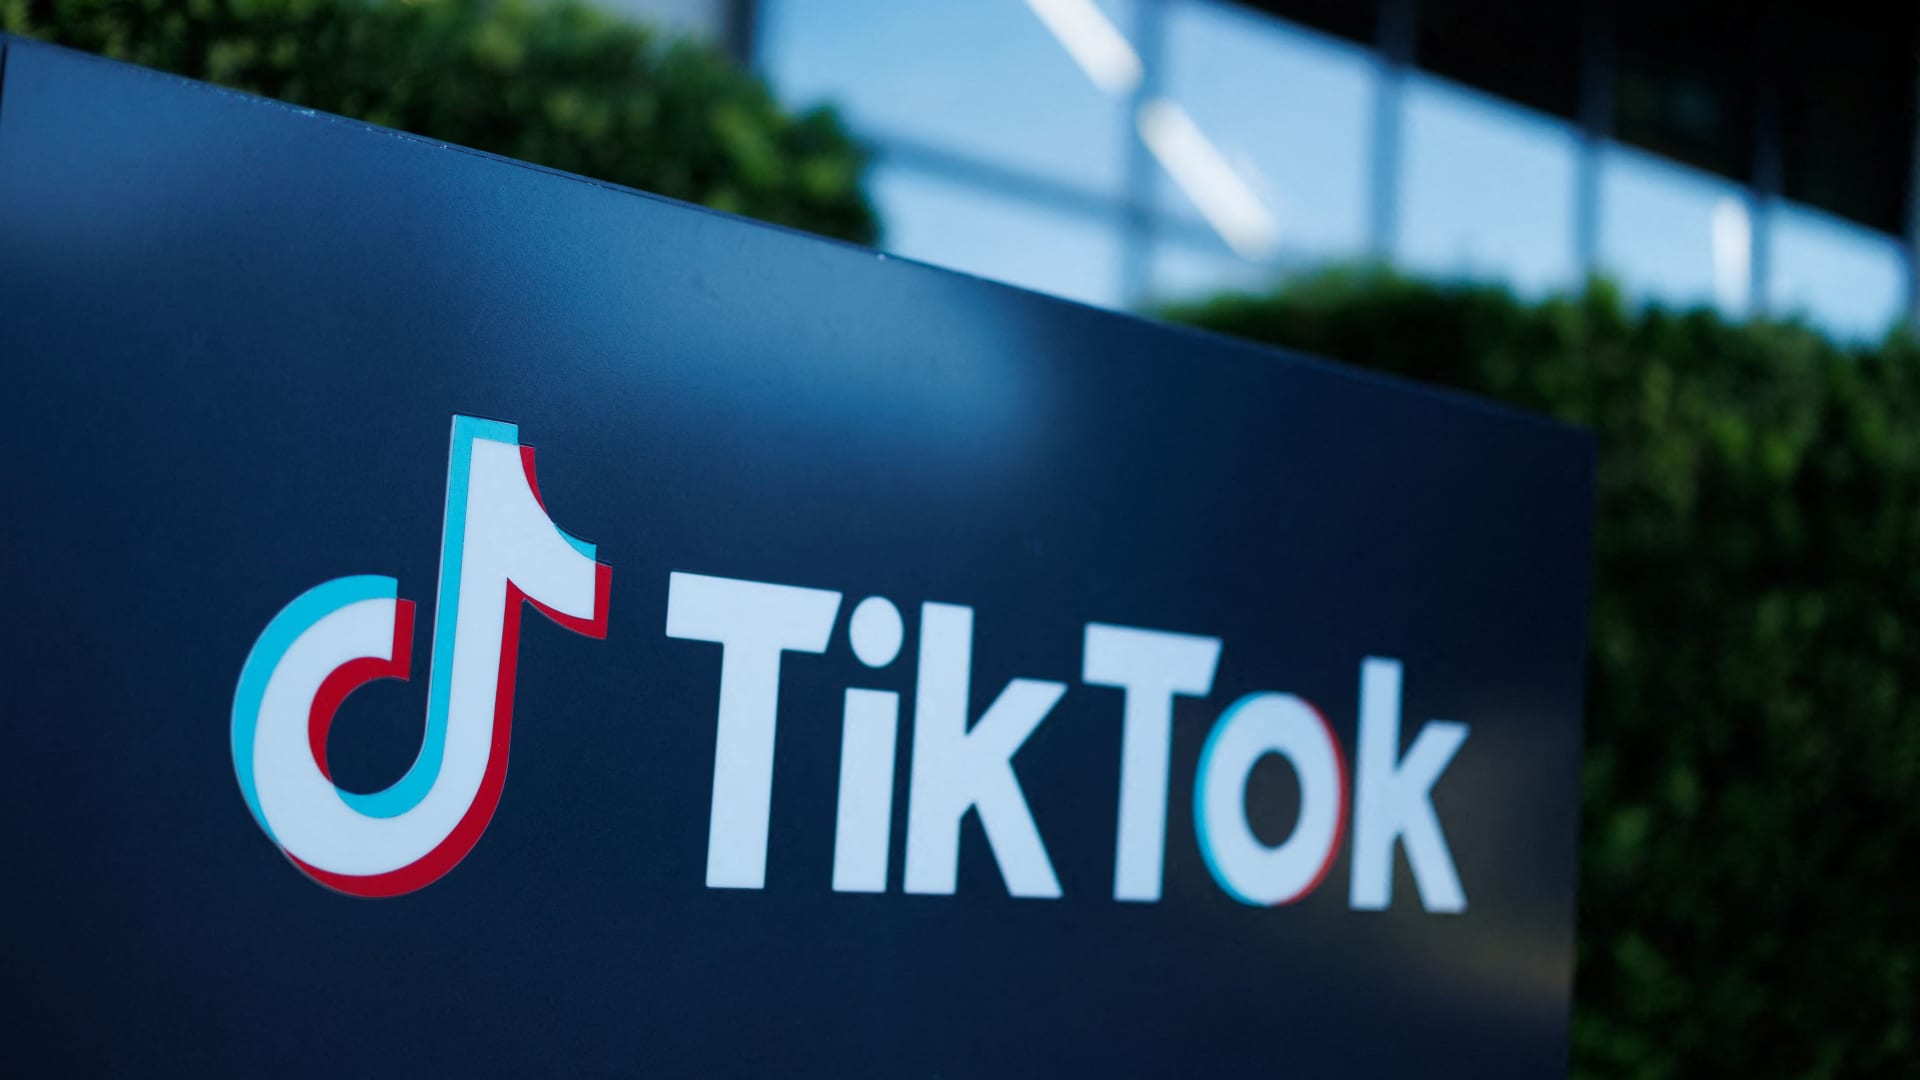 Kevin O'Leary wants to buy TikTok at up to 90% discount. Here's why